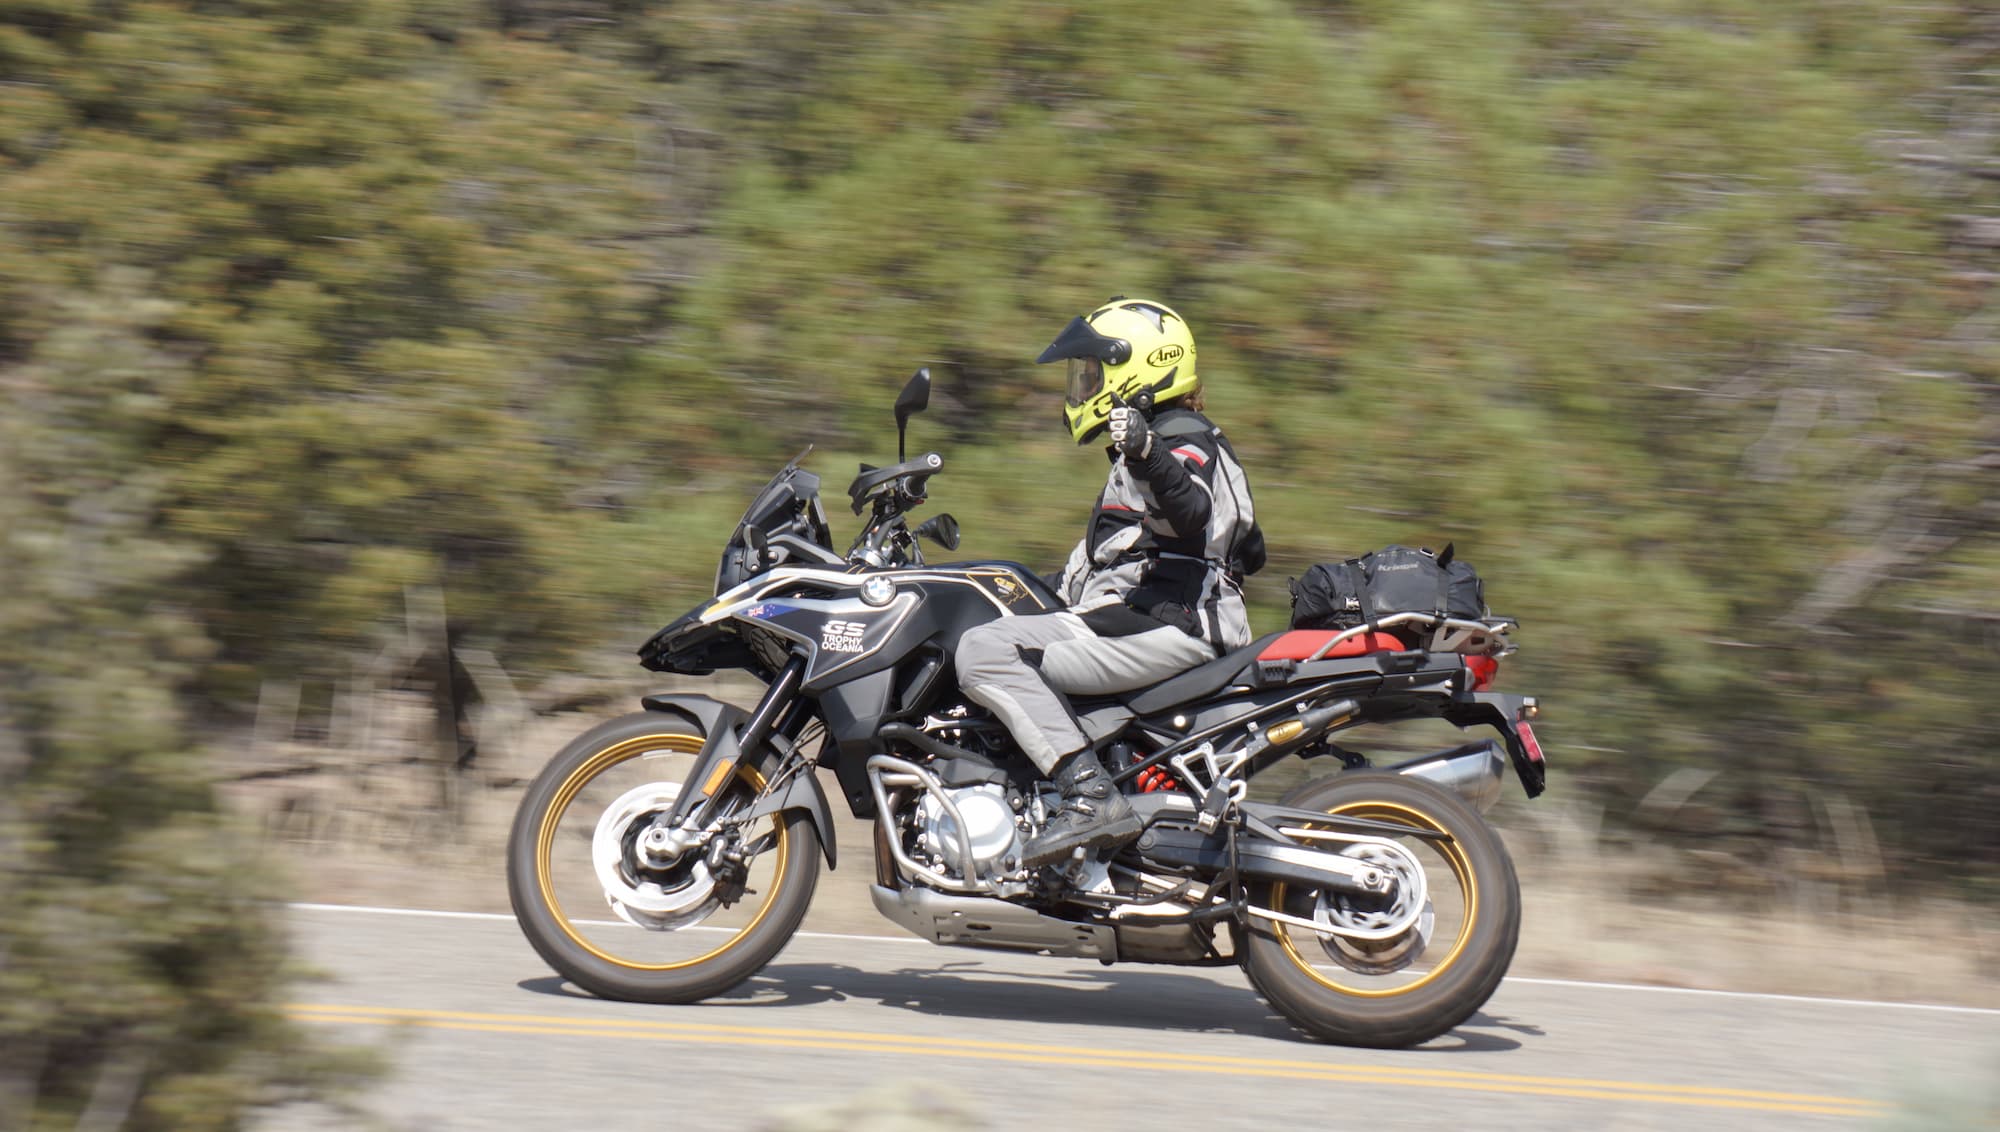 a person riding a motorcyle wearing a yellow helmet